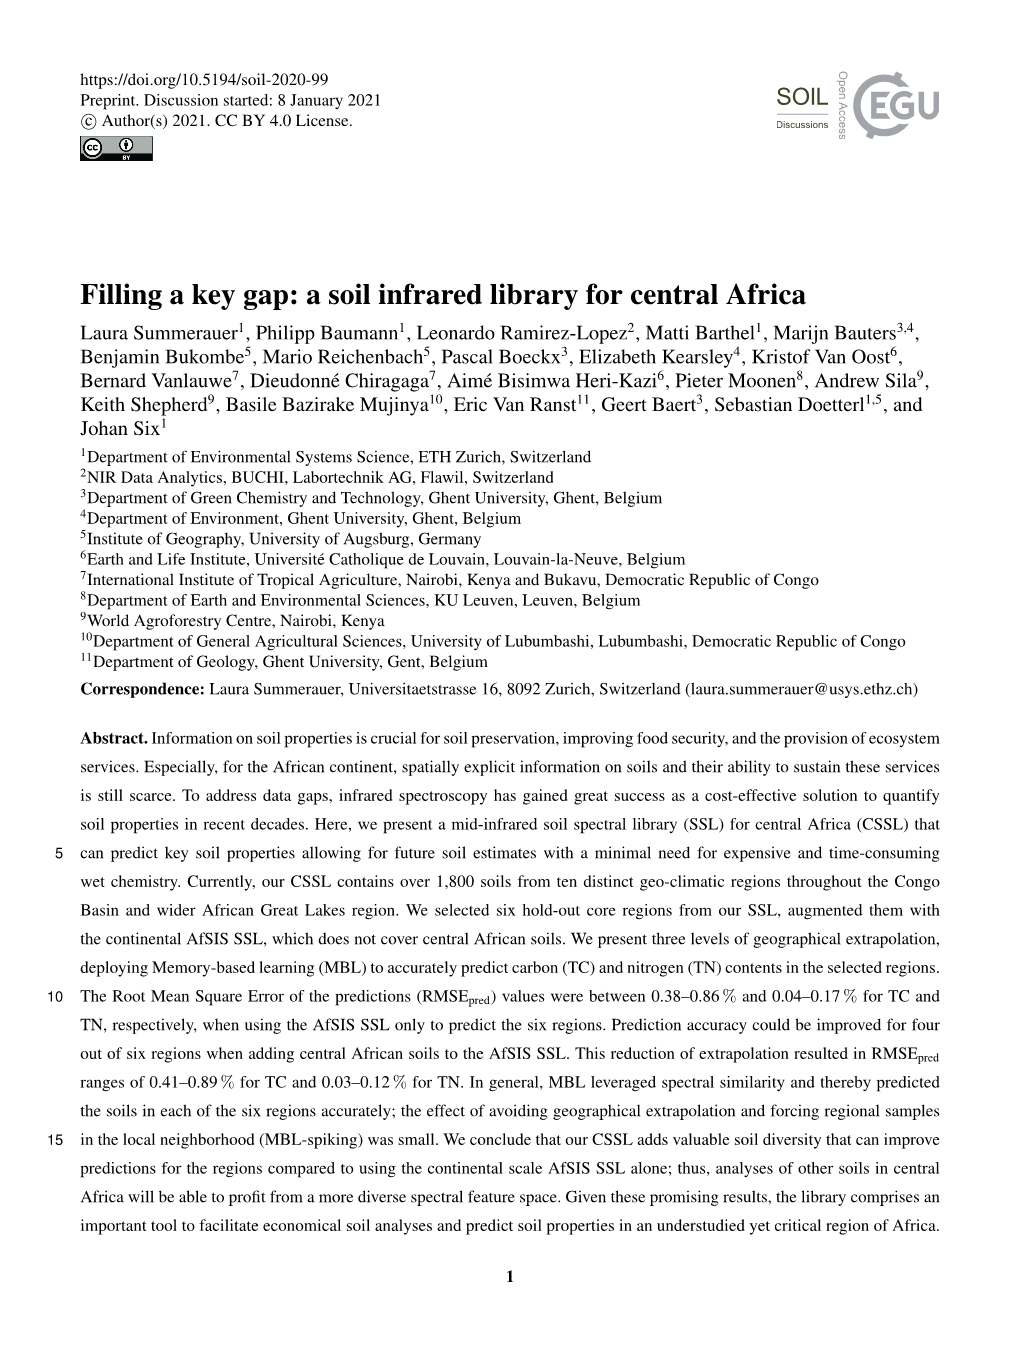 Filling a Key Gap: a Soil Infrared Library for Central Africa